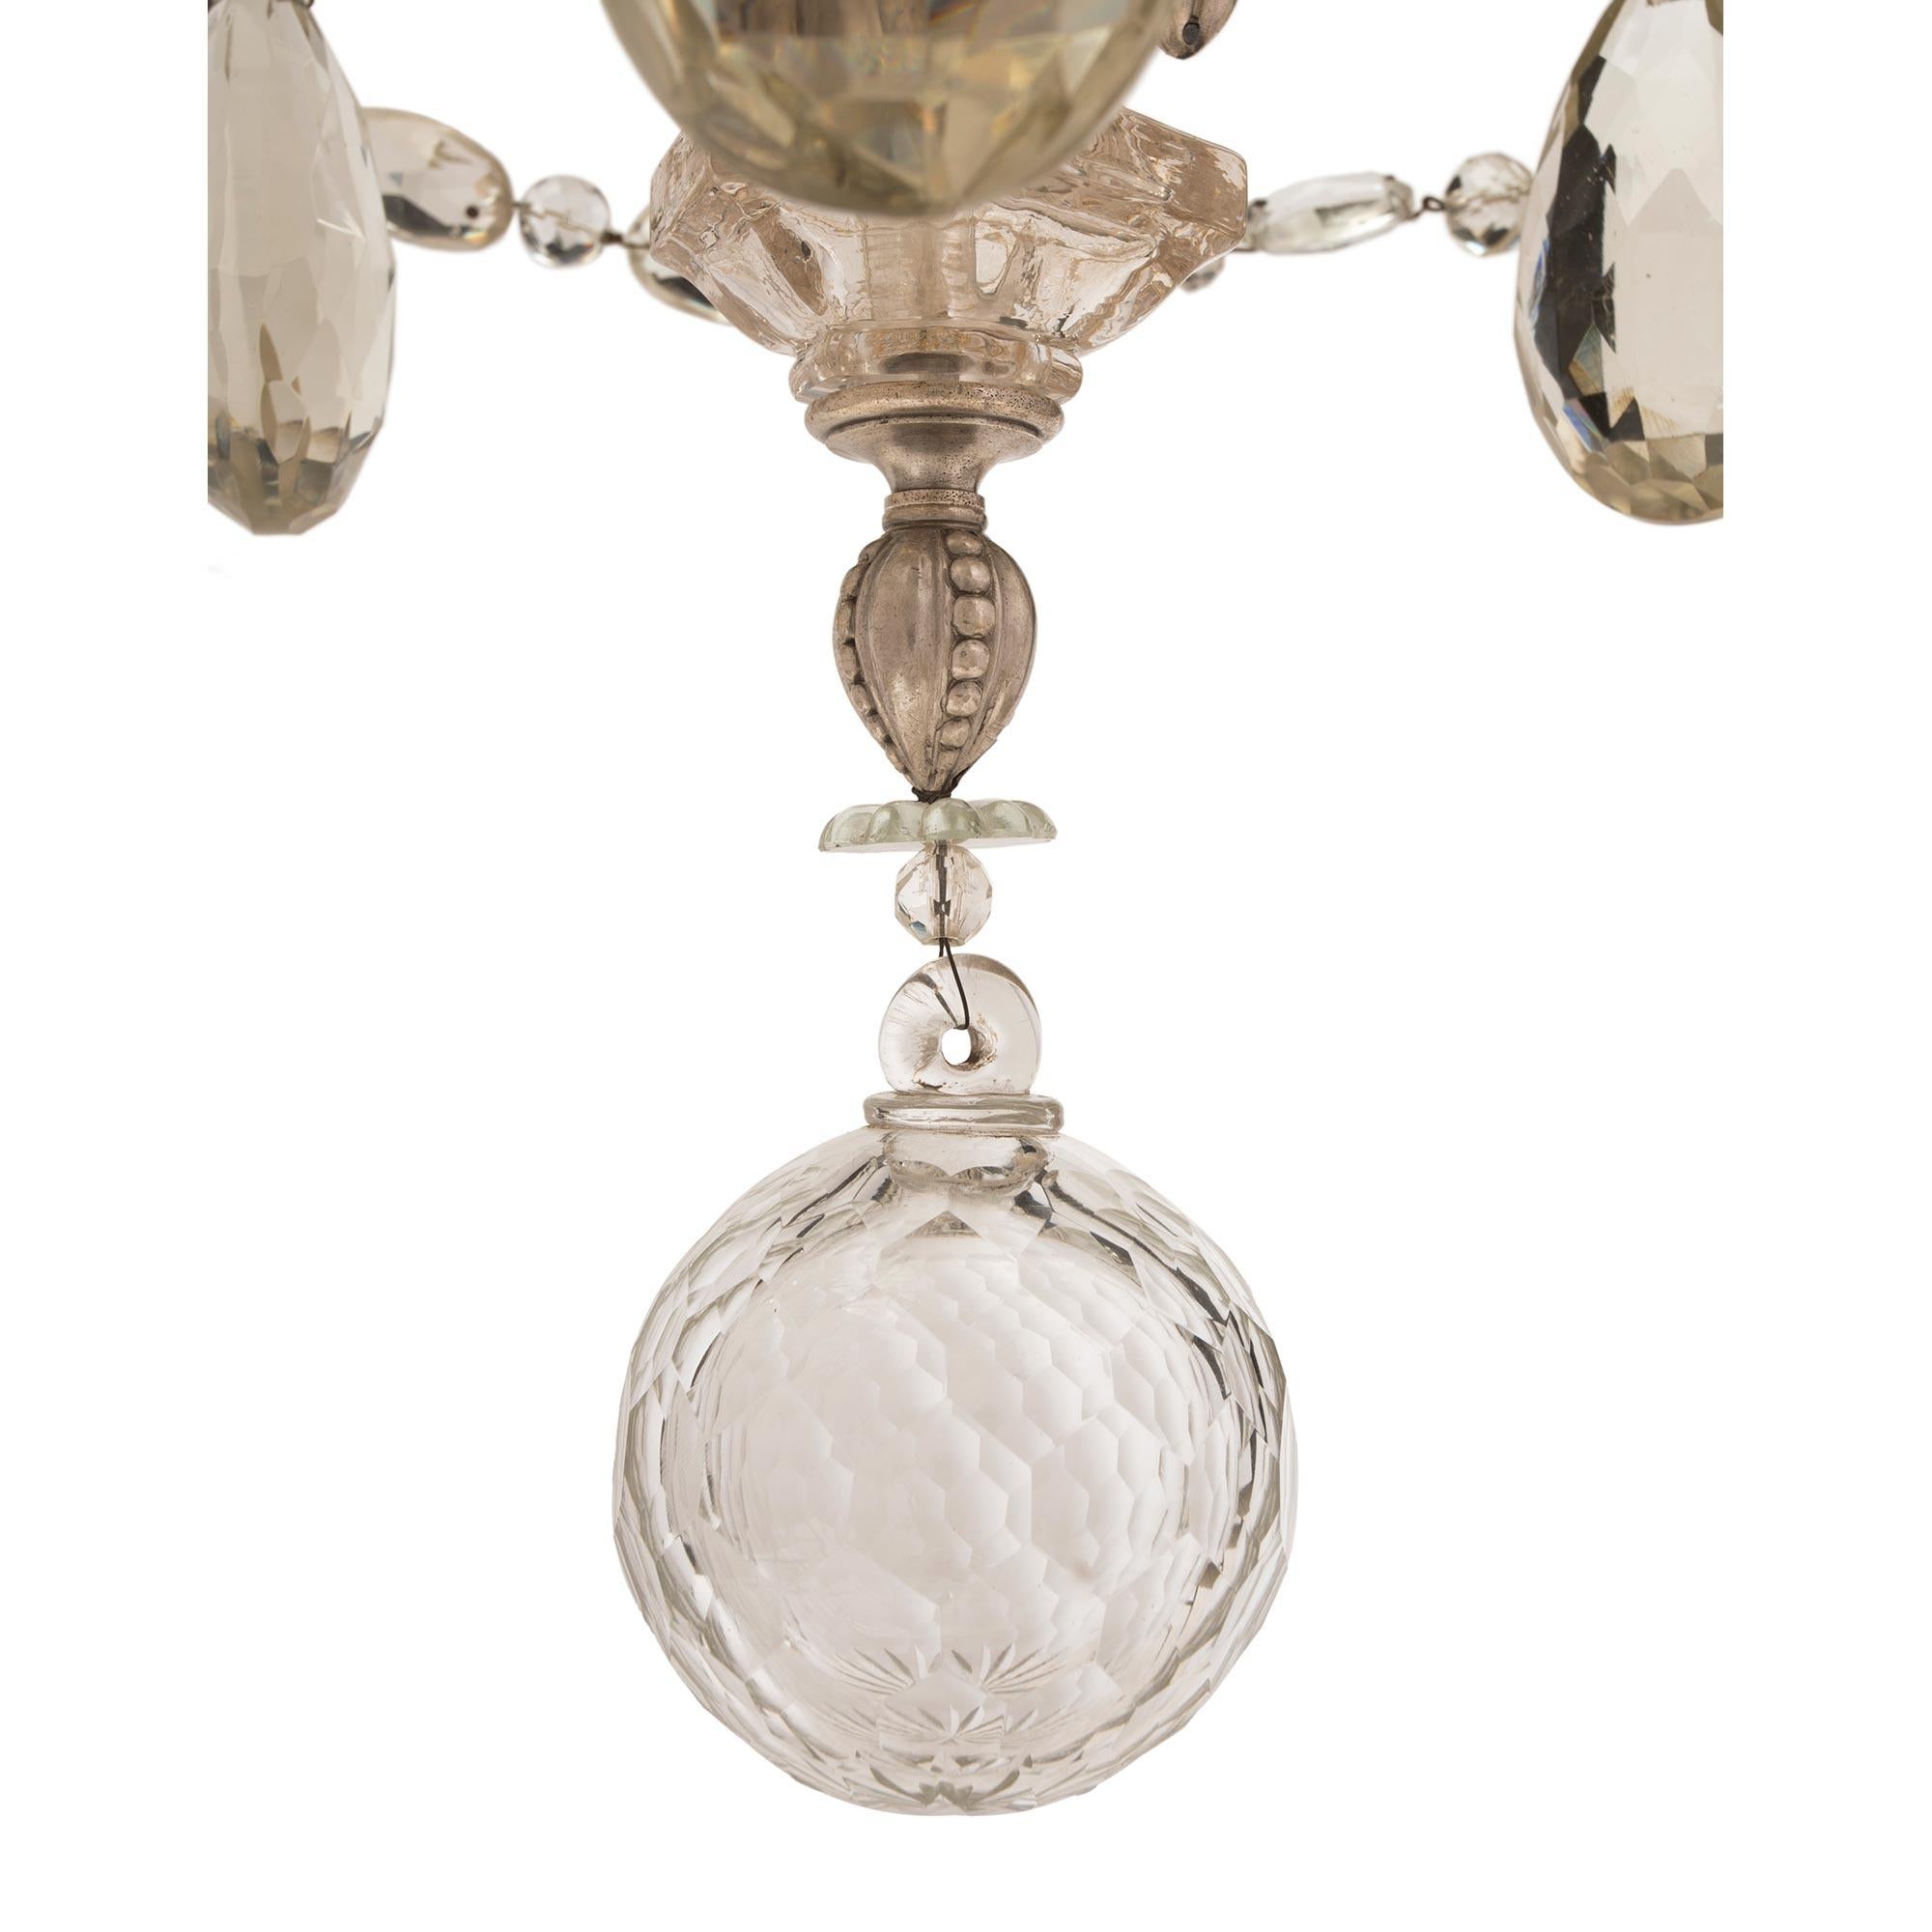 French Mid-19th Century Louis XVI Style Baccarat Crystal and Bronze Chandelier For Sale 4